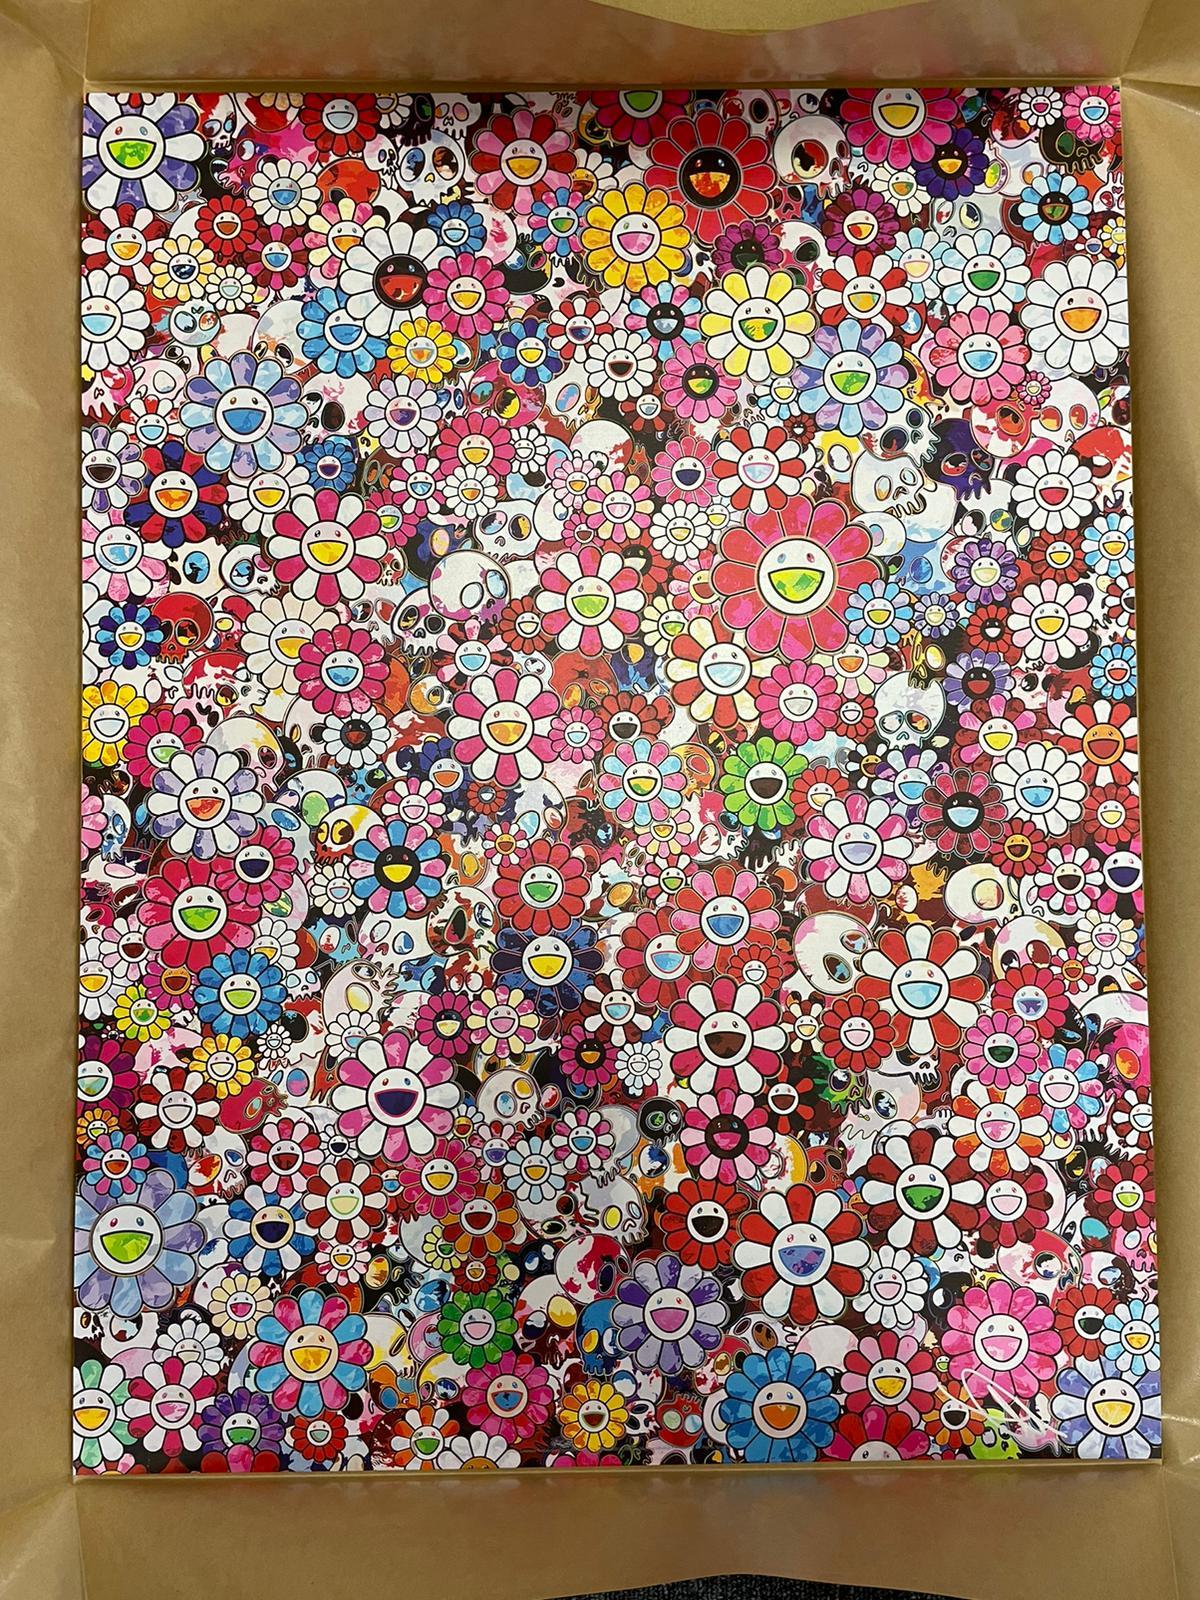 Circus Hold peace and darkness in your heart Limited Edition (print) by Murakami - Print by Takashi Murakami